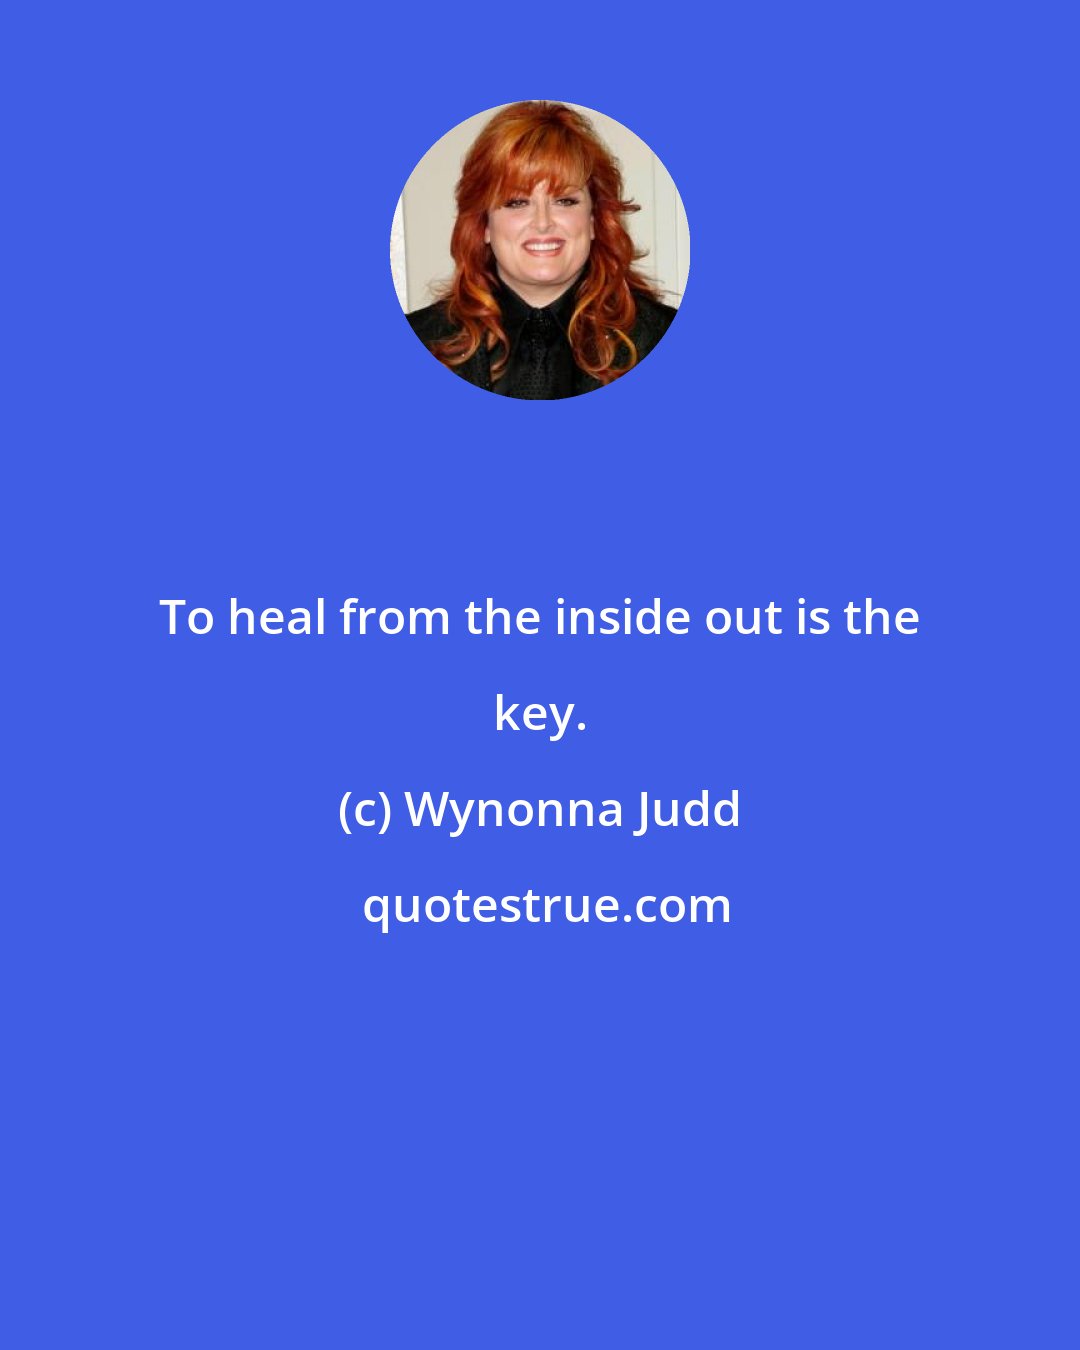 Wynonna Judd: To heal from the inside out is the key.